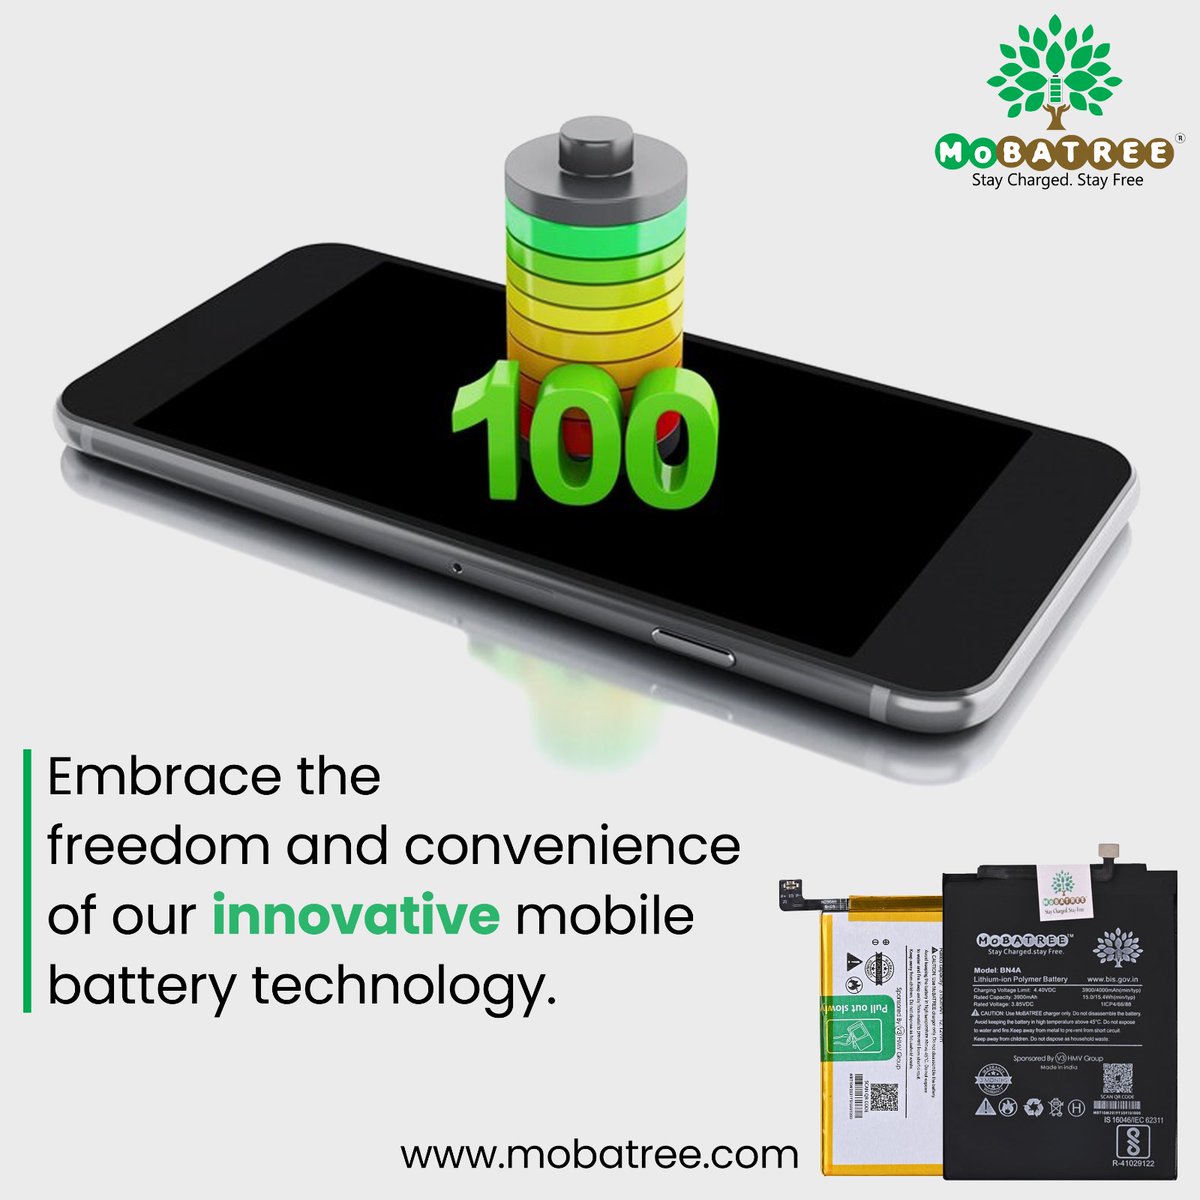 Say goodbye to low battery!
And Hi 👋 to Mobatree. We are the battery experts!
All types of lithium - Ion Batteries available

#mobatree #mobatreebattery #mobilebattery #phonebattery #battery #batterystorage #batterypowered #lowbattery #iphonebattery #iphonerepair #xiaomi #redmi